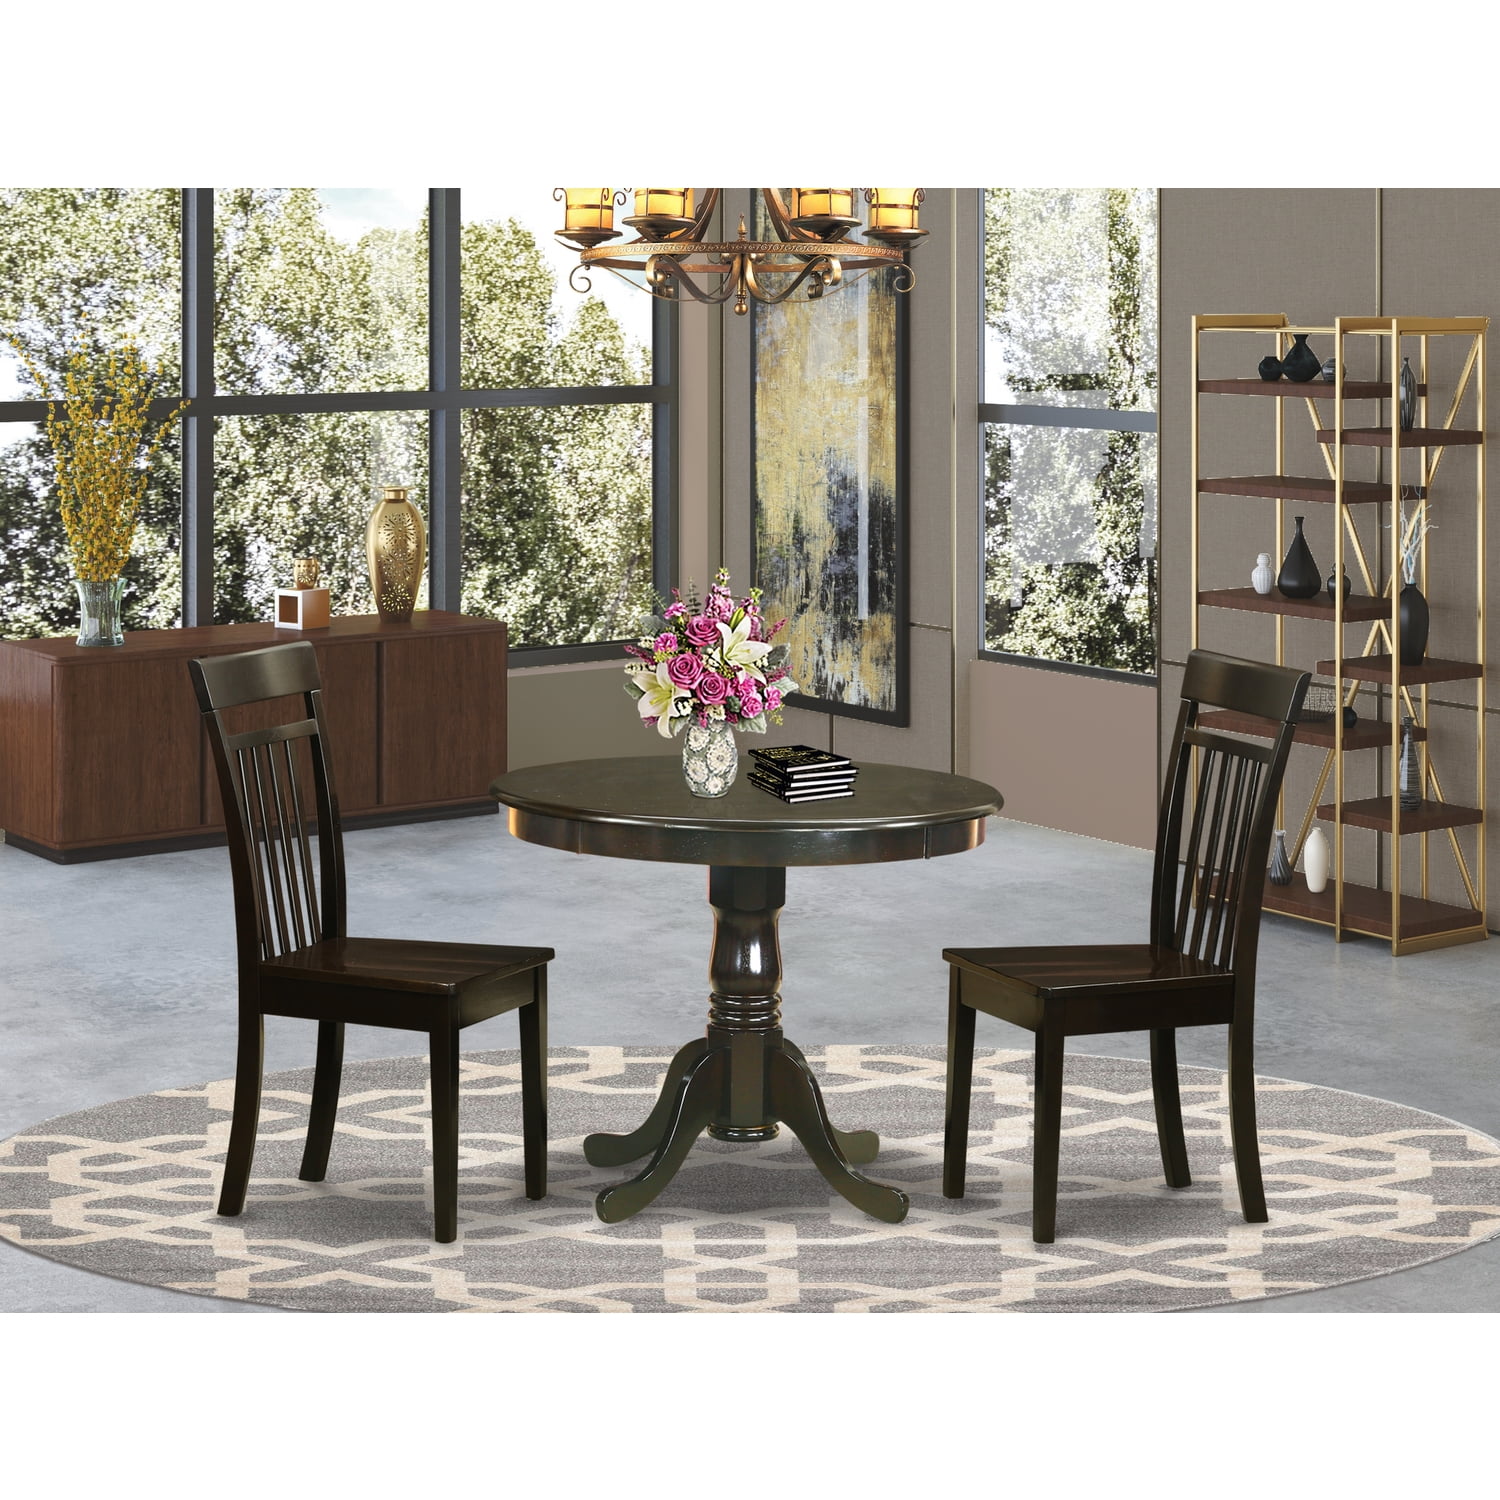 ANCA3-CAP-W 3 Pc Kitchen Table set-Kitchen Table and 2 Dining Chairs ...